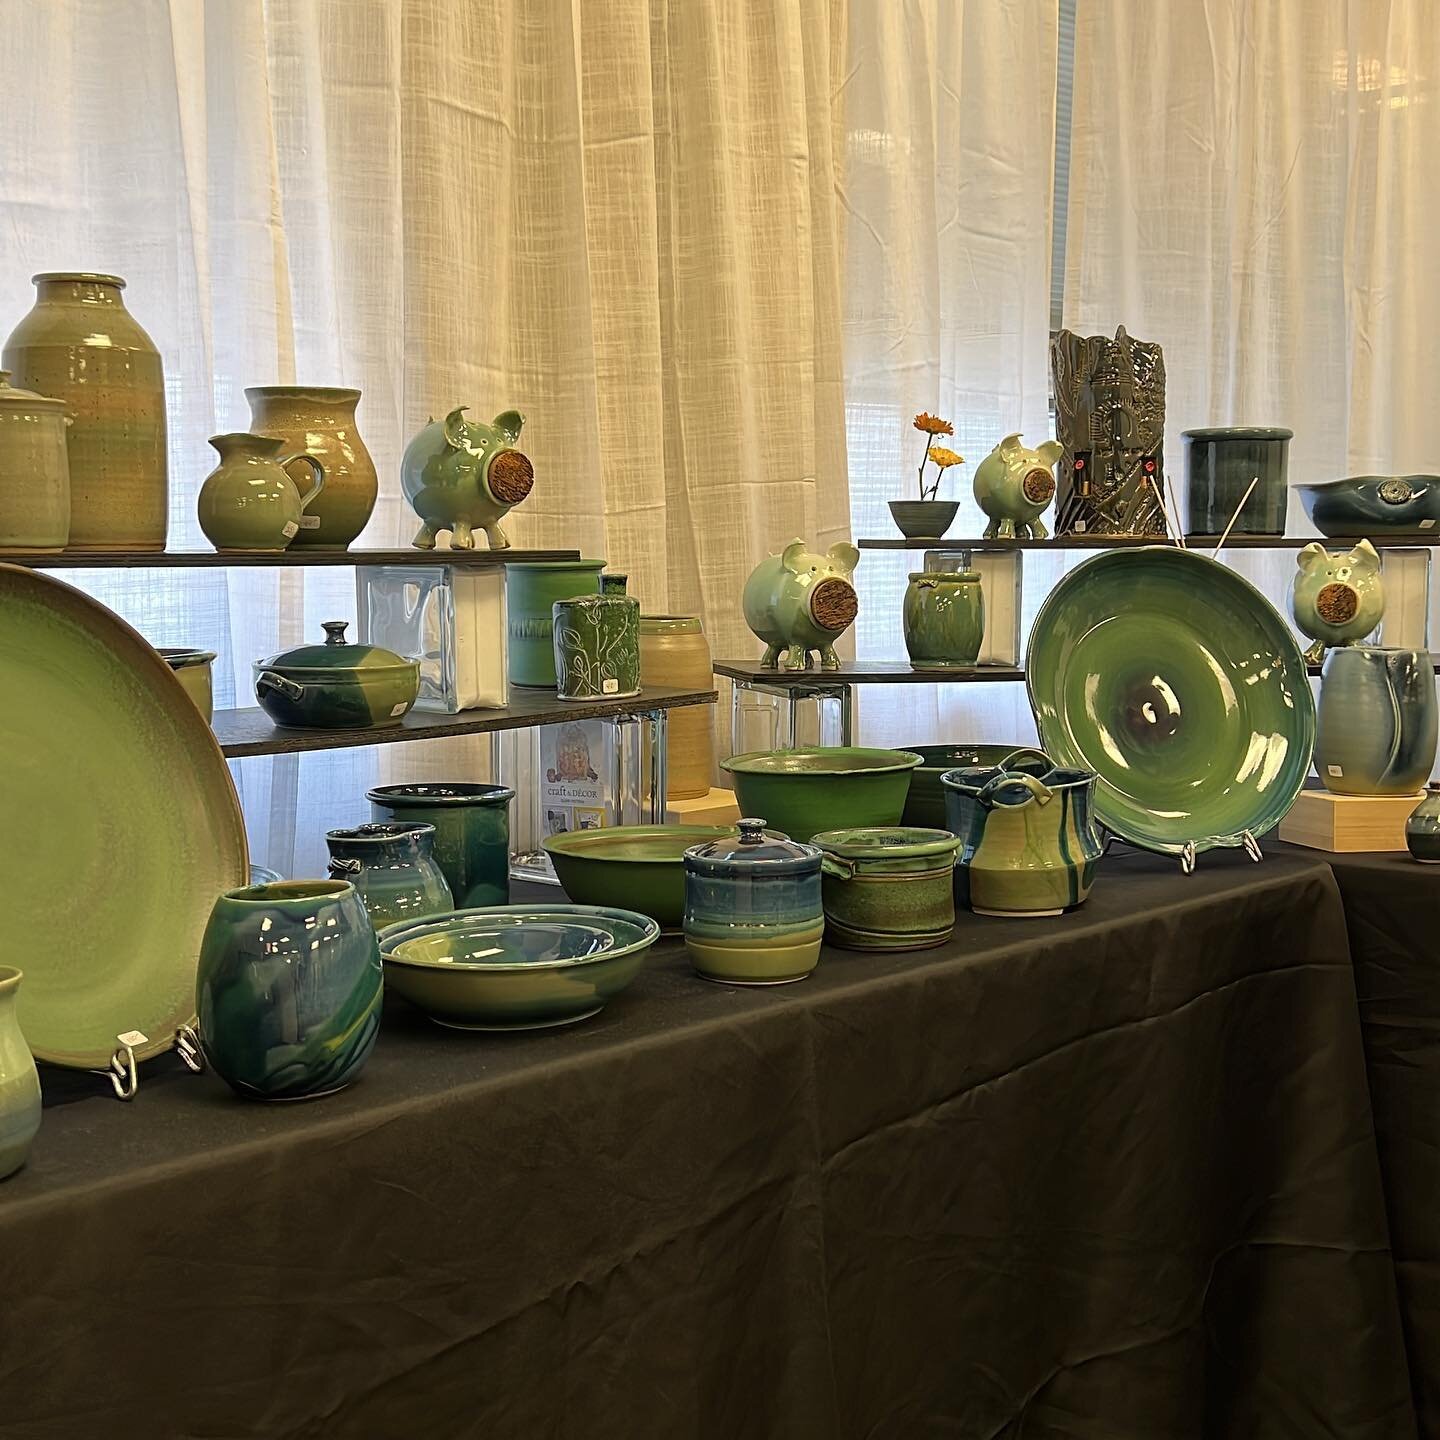 #BloomingtonHandmadeMarket #KellyMeskaPottery Let them in! Let&rsquo;s go! Today and tomorrow at the Monroe Convention Center